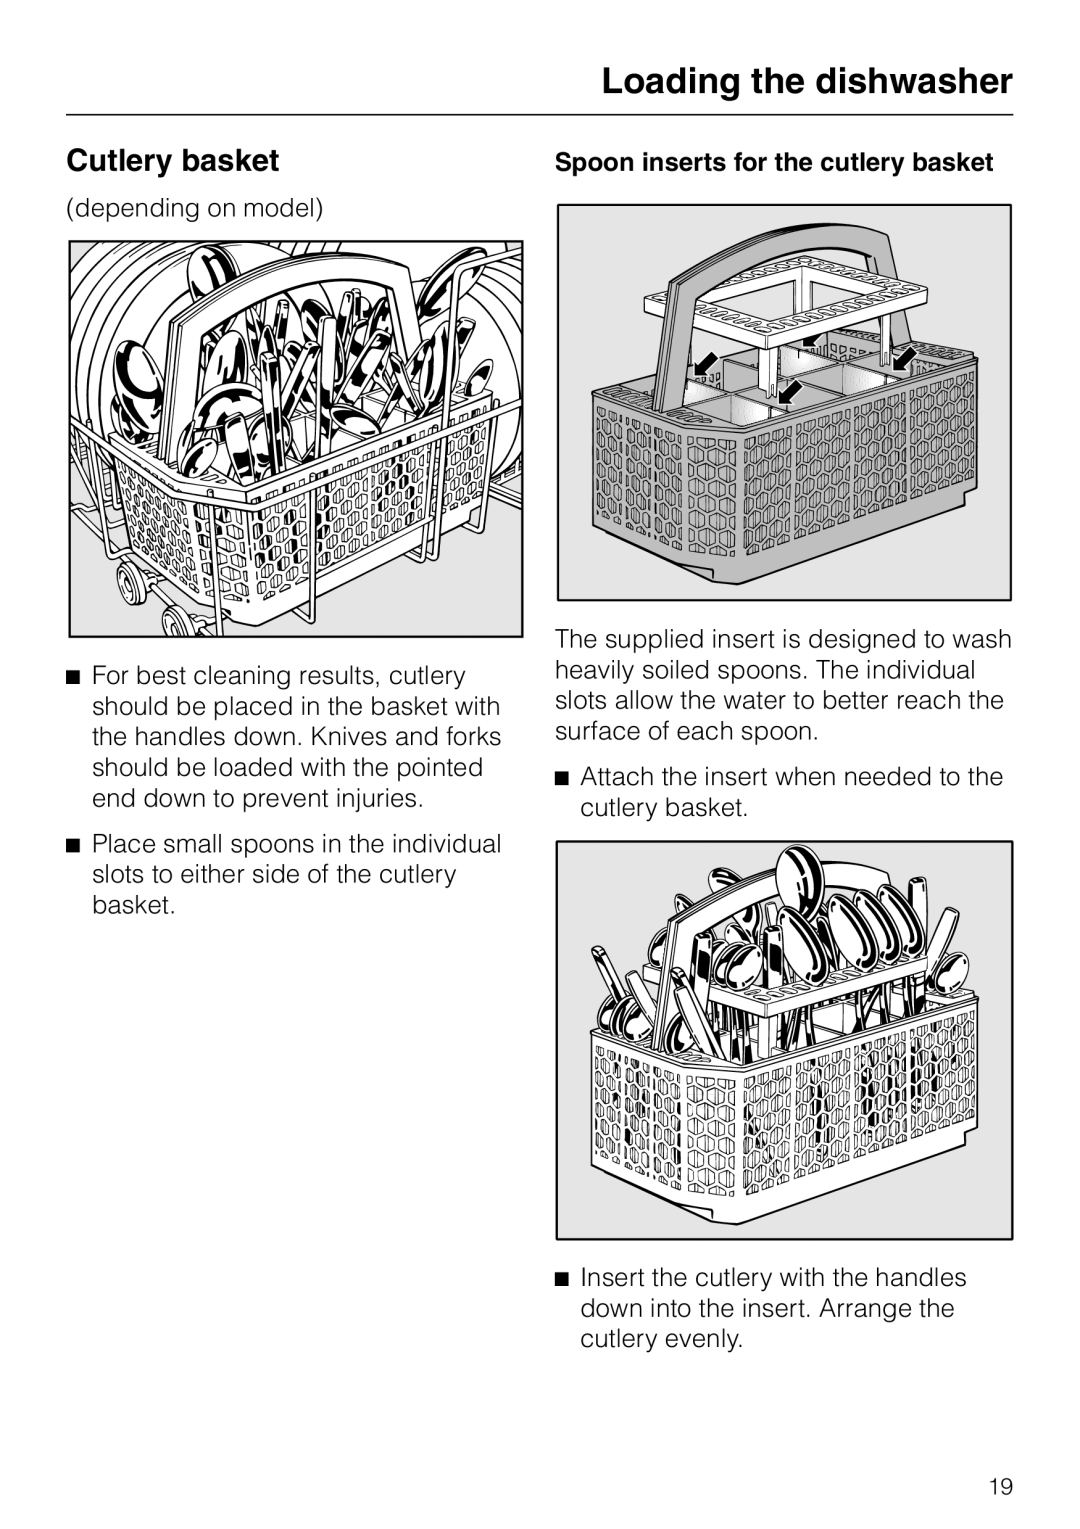 Miele G 2430, G 2420 manual Cutlery basket, Loading the dishwasher, Spoon inserts for the cutlery basket 